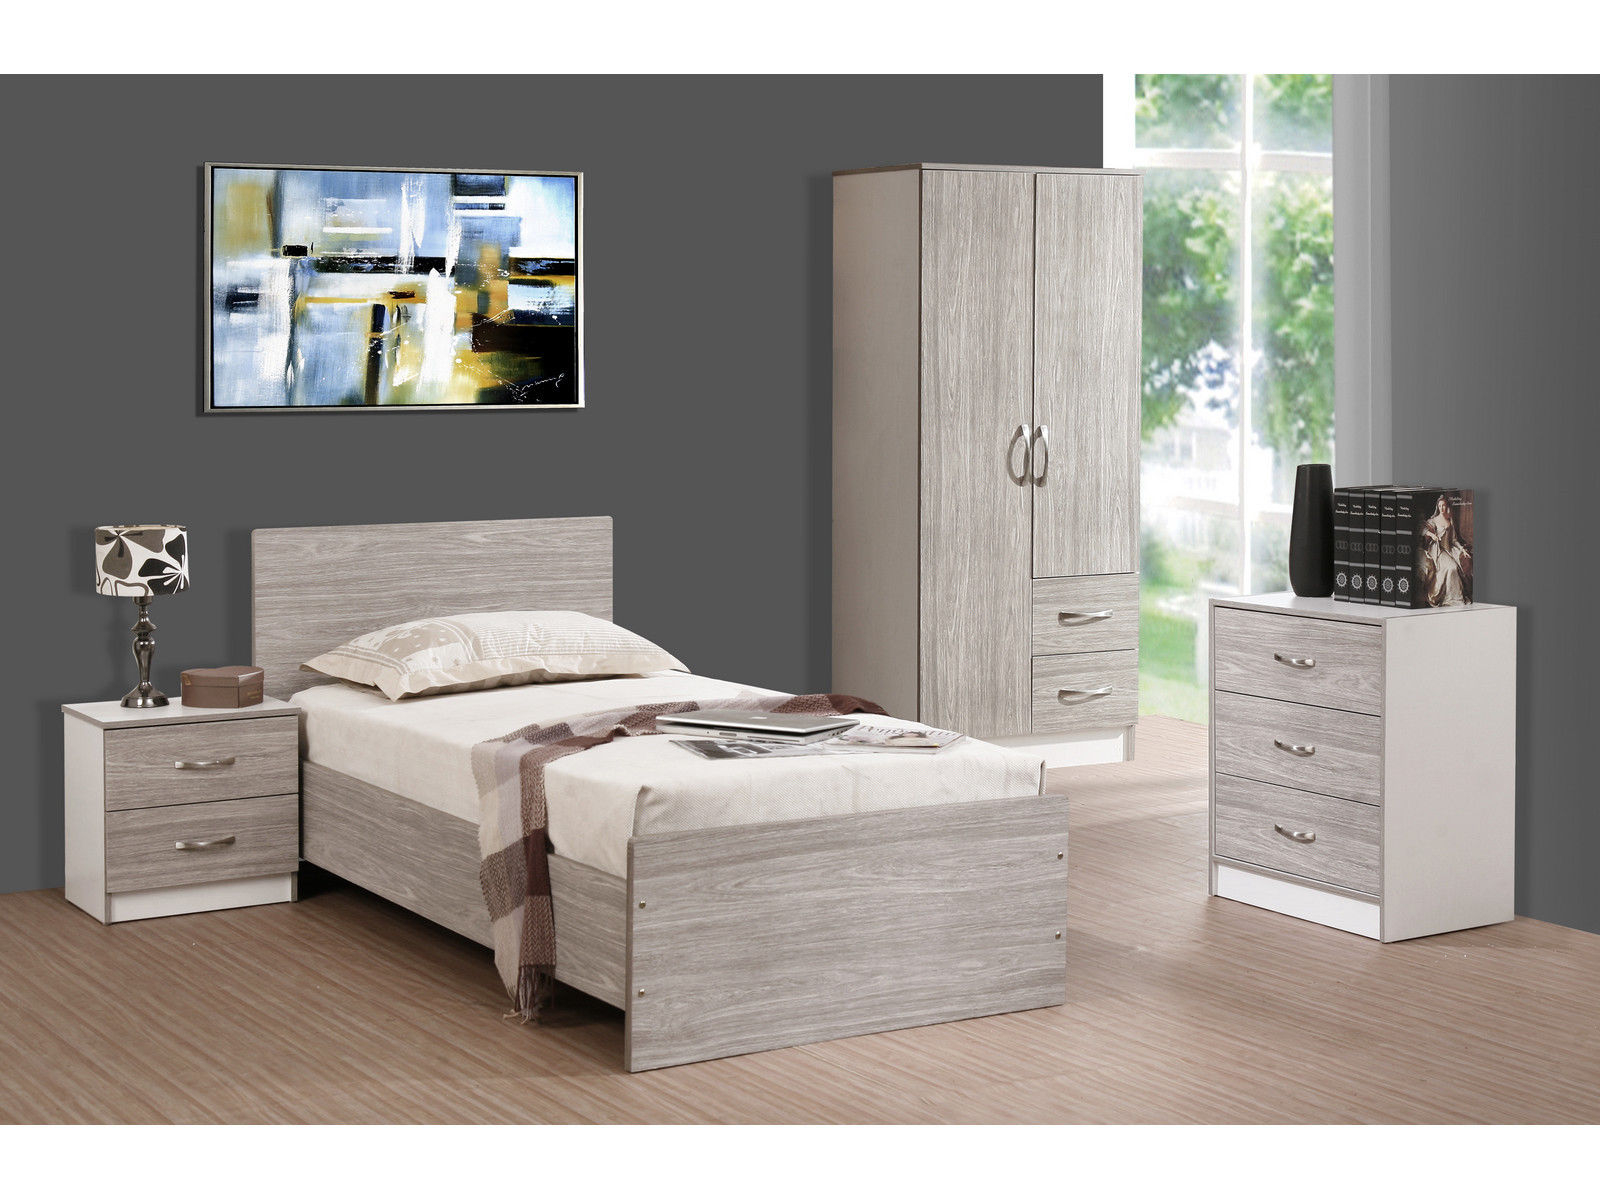 Details About Grey Oak White 3 Piece Bedroom Furniture Set Marina High Gloss Range for size 1600 X 1200